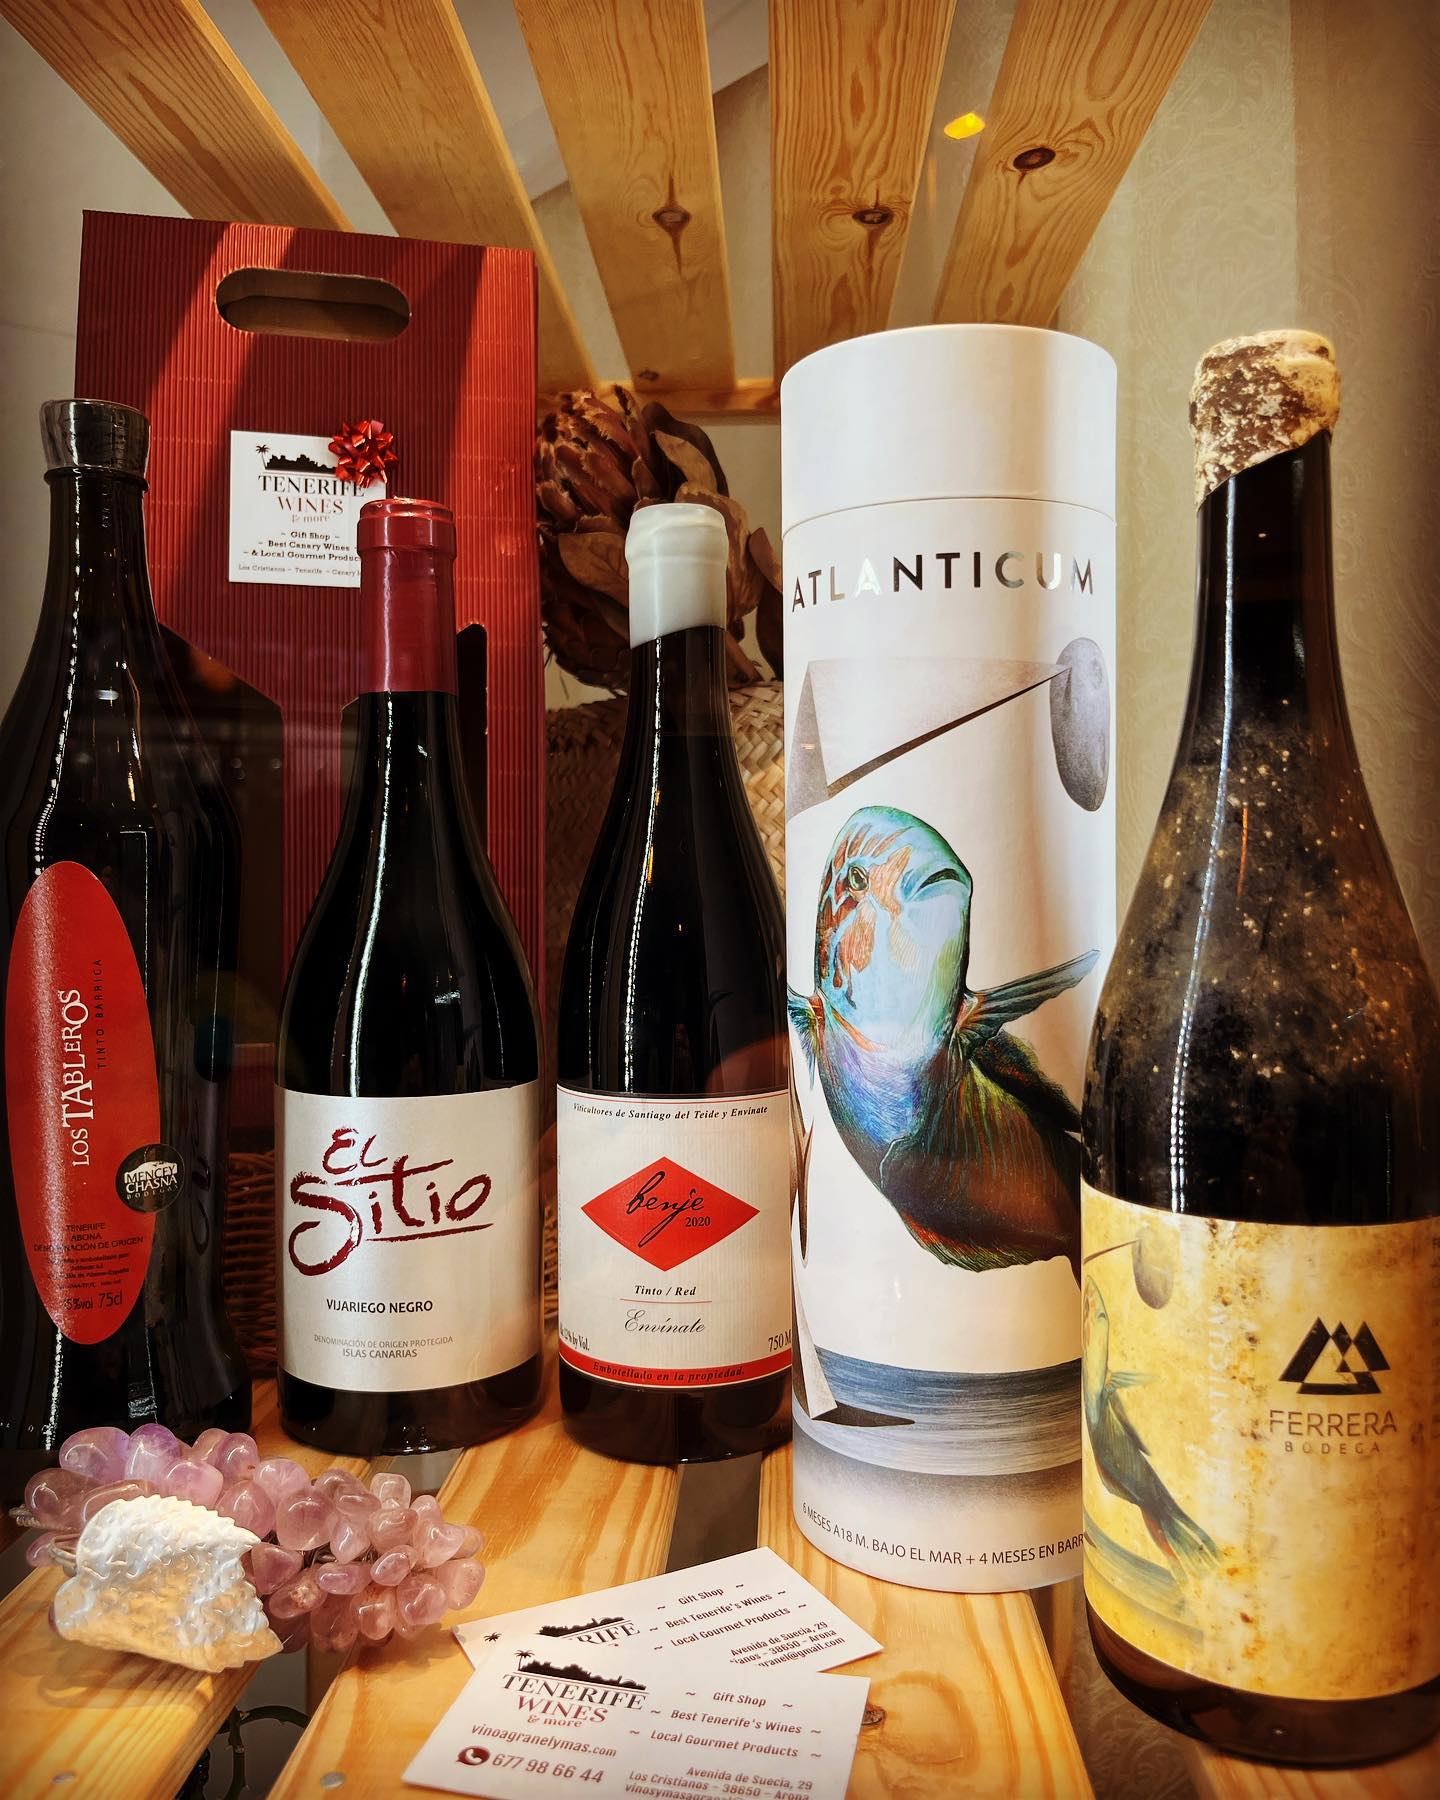 Images Tenerife Wines & Local Gourmet Products